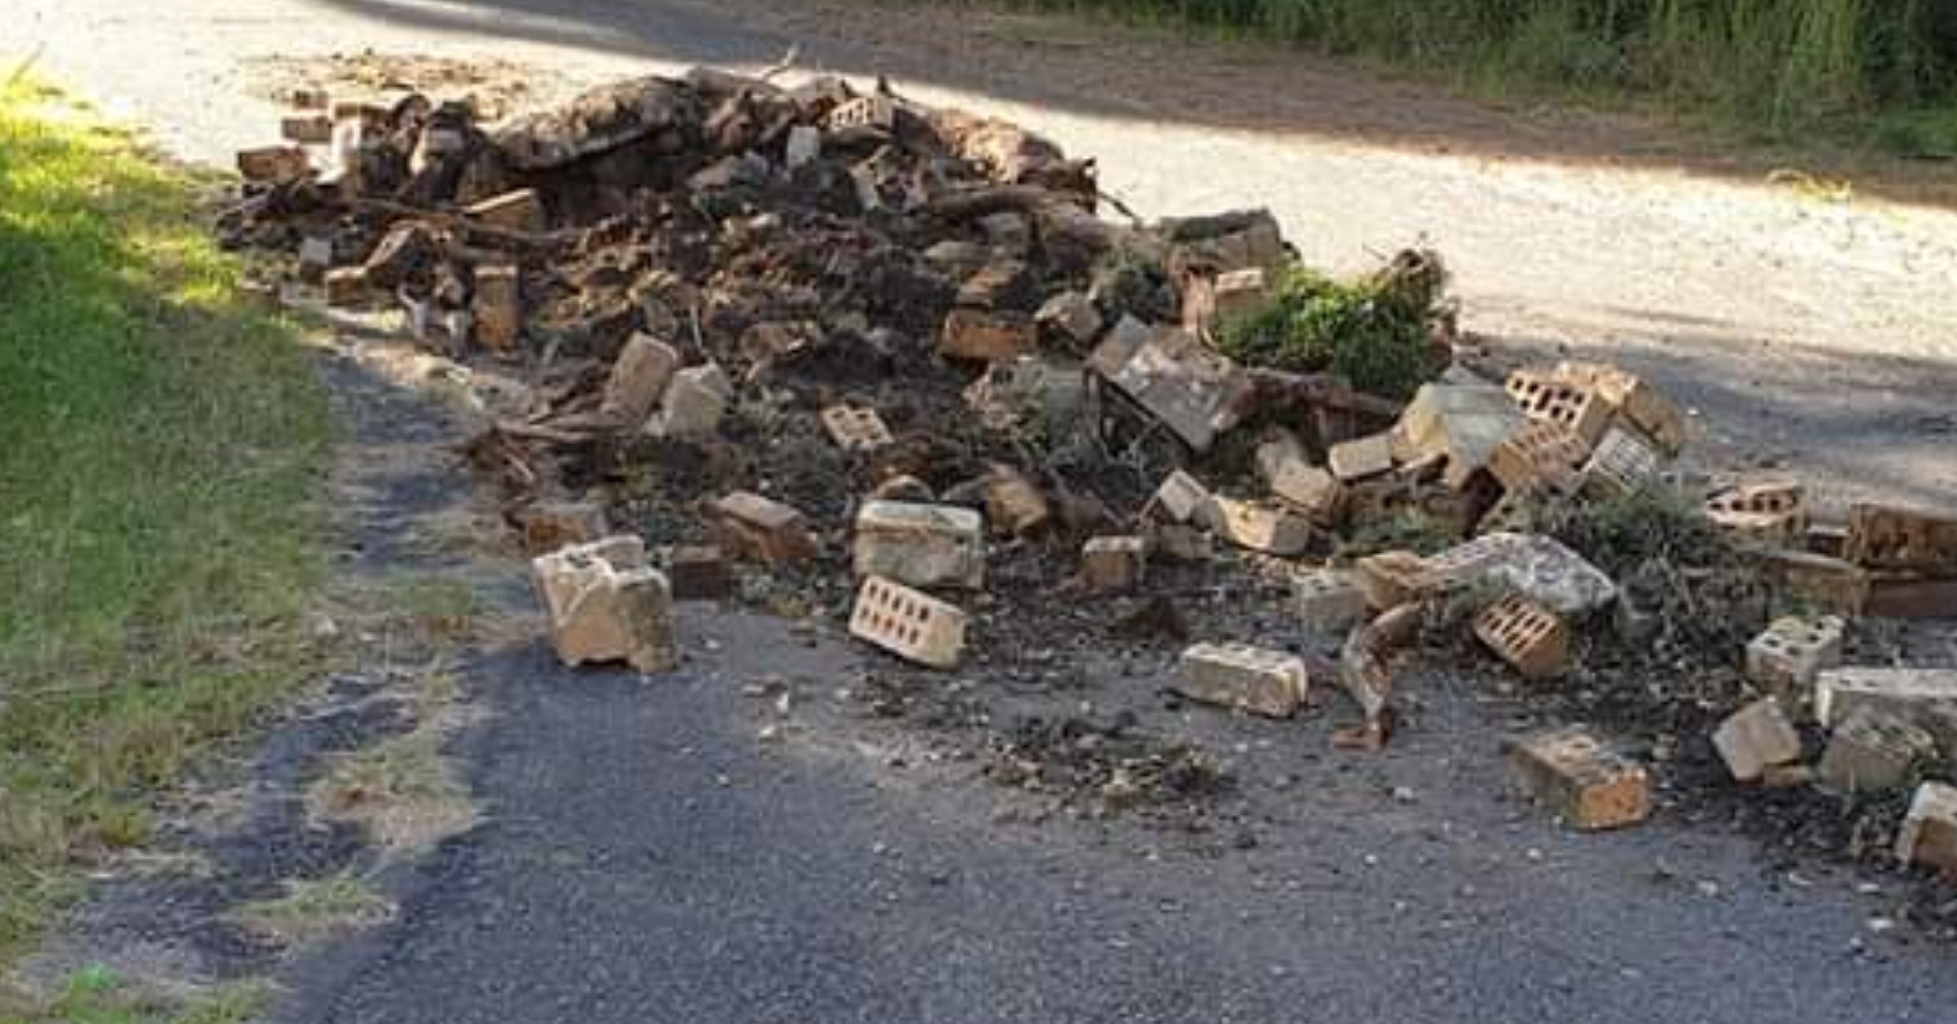 Read more about the article FIRE STATION ACCESS BLOCKED BY ILLEGAL DUMPING